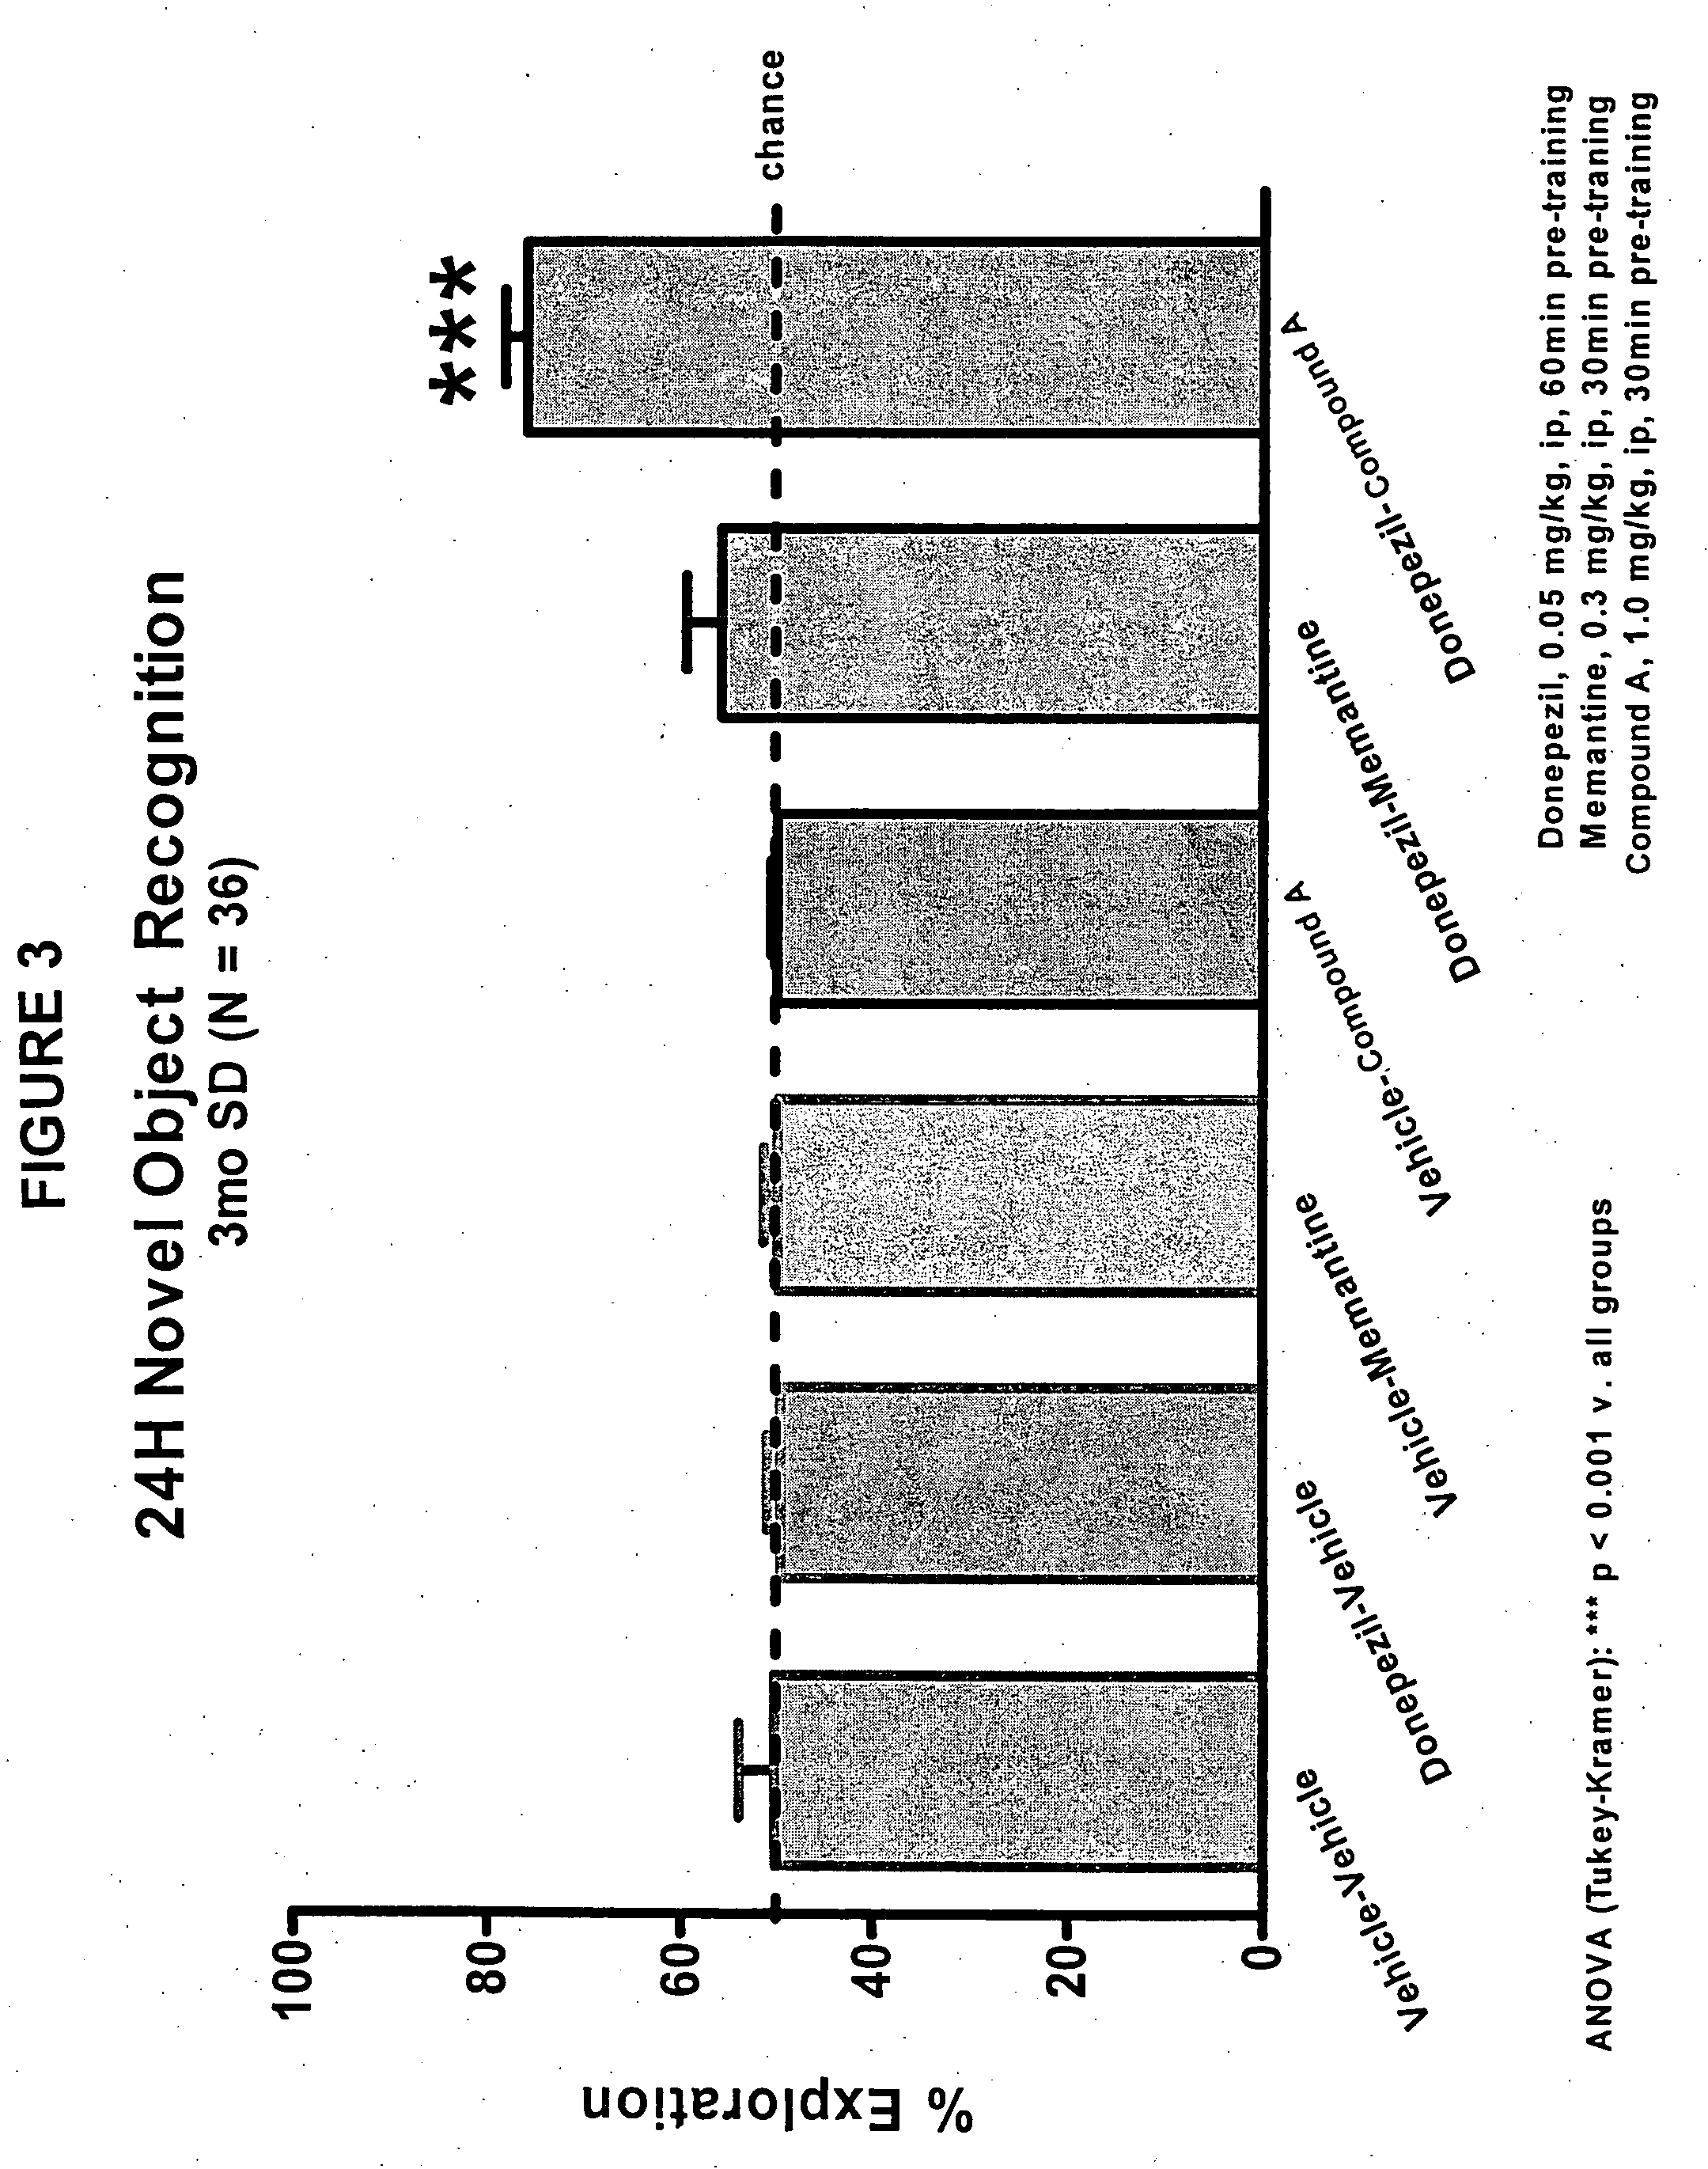 Compositions and methods of treatment using L-type calcium channel blockers and cholinesterase inhibitors